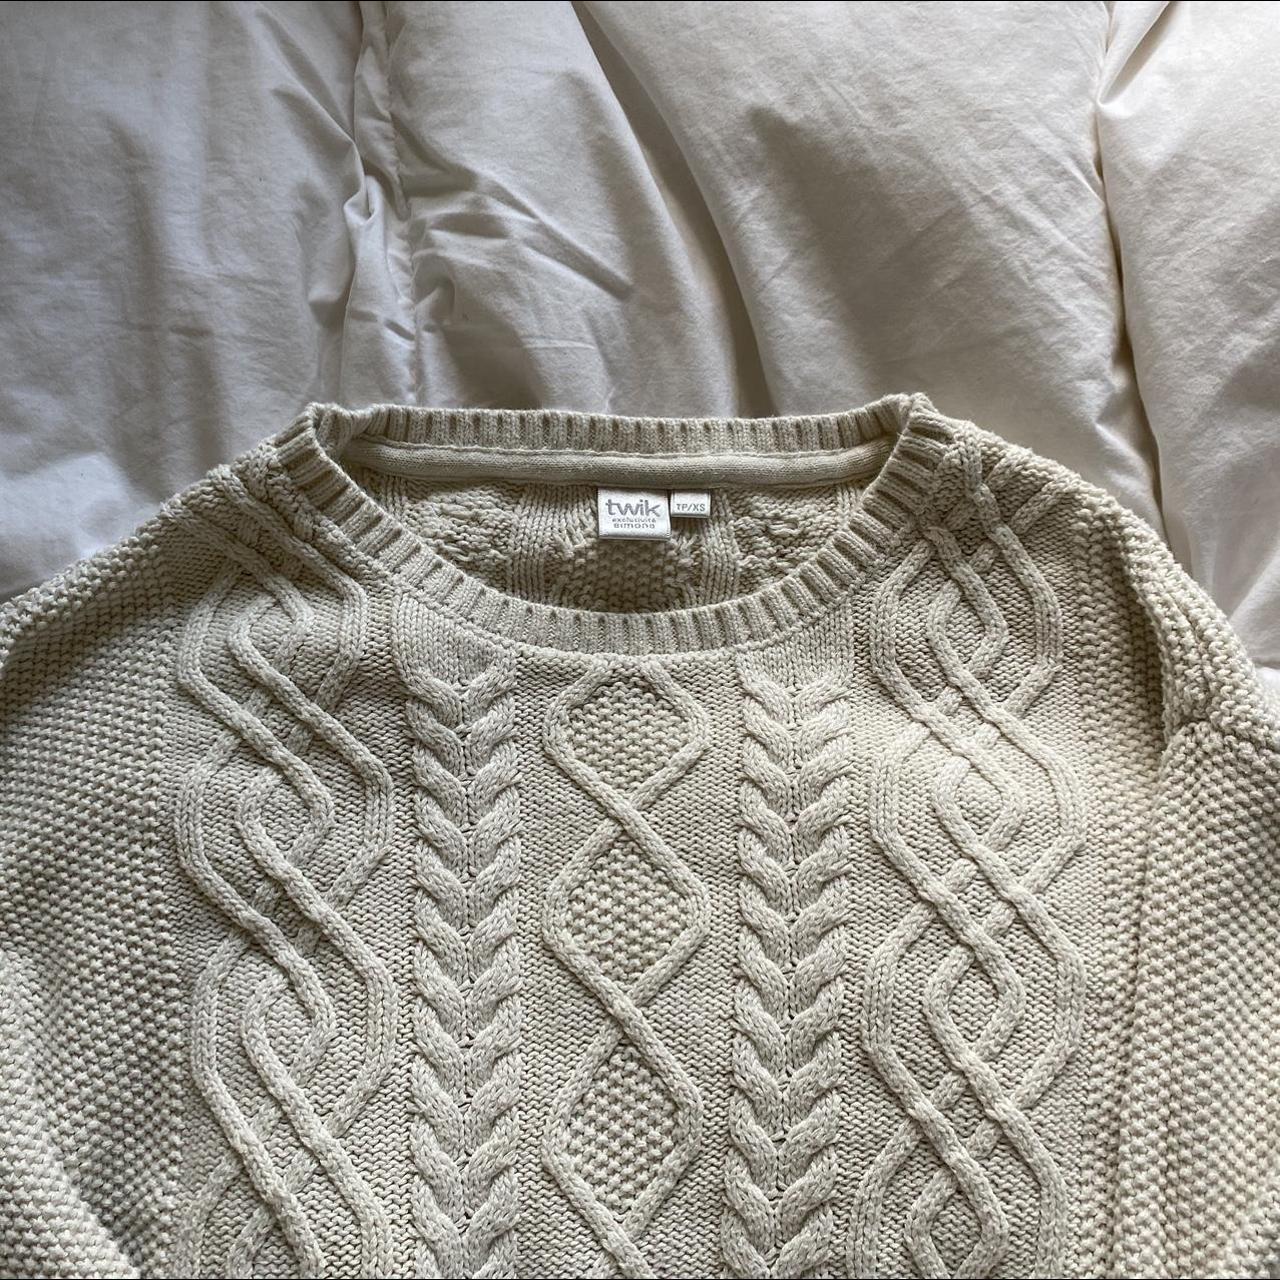 creme rory gilmore cable knit sweater perfect for... Depop